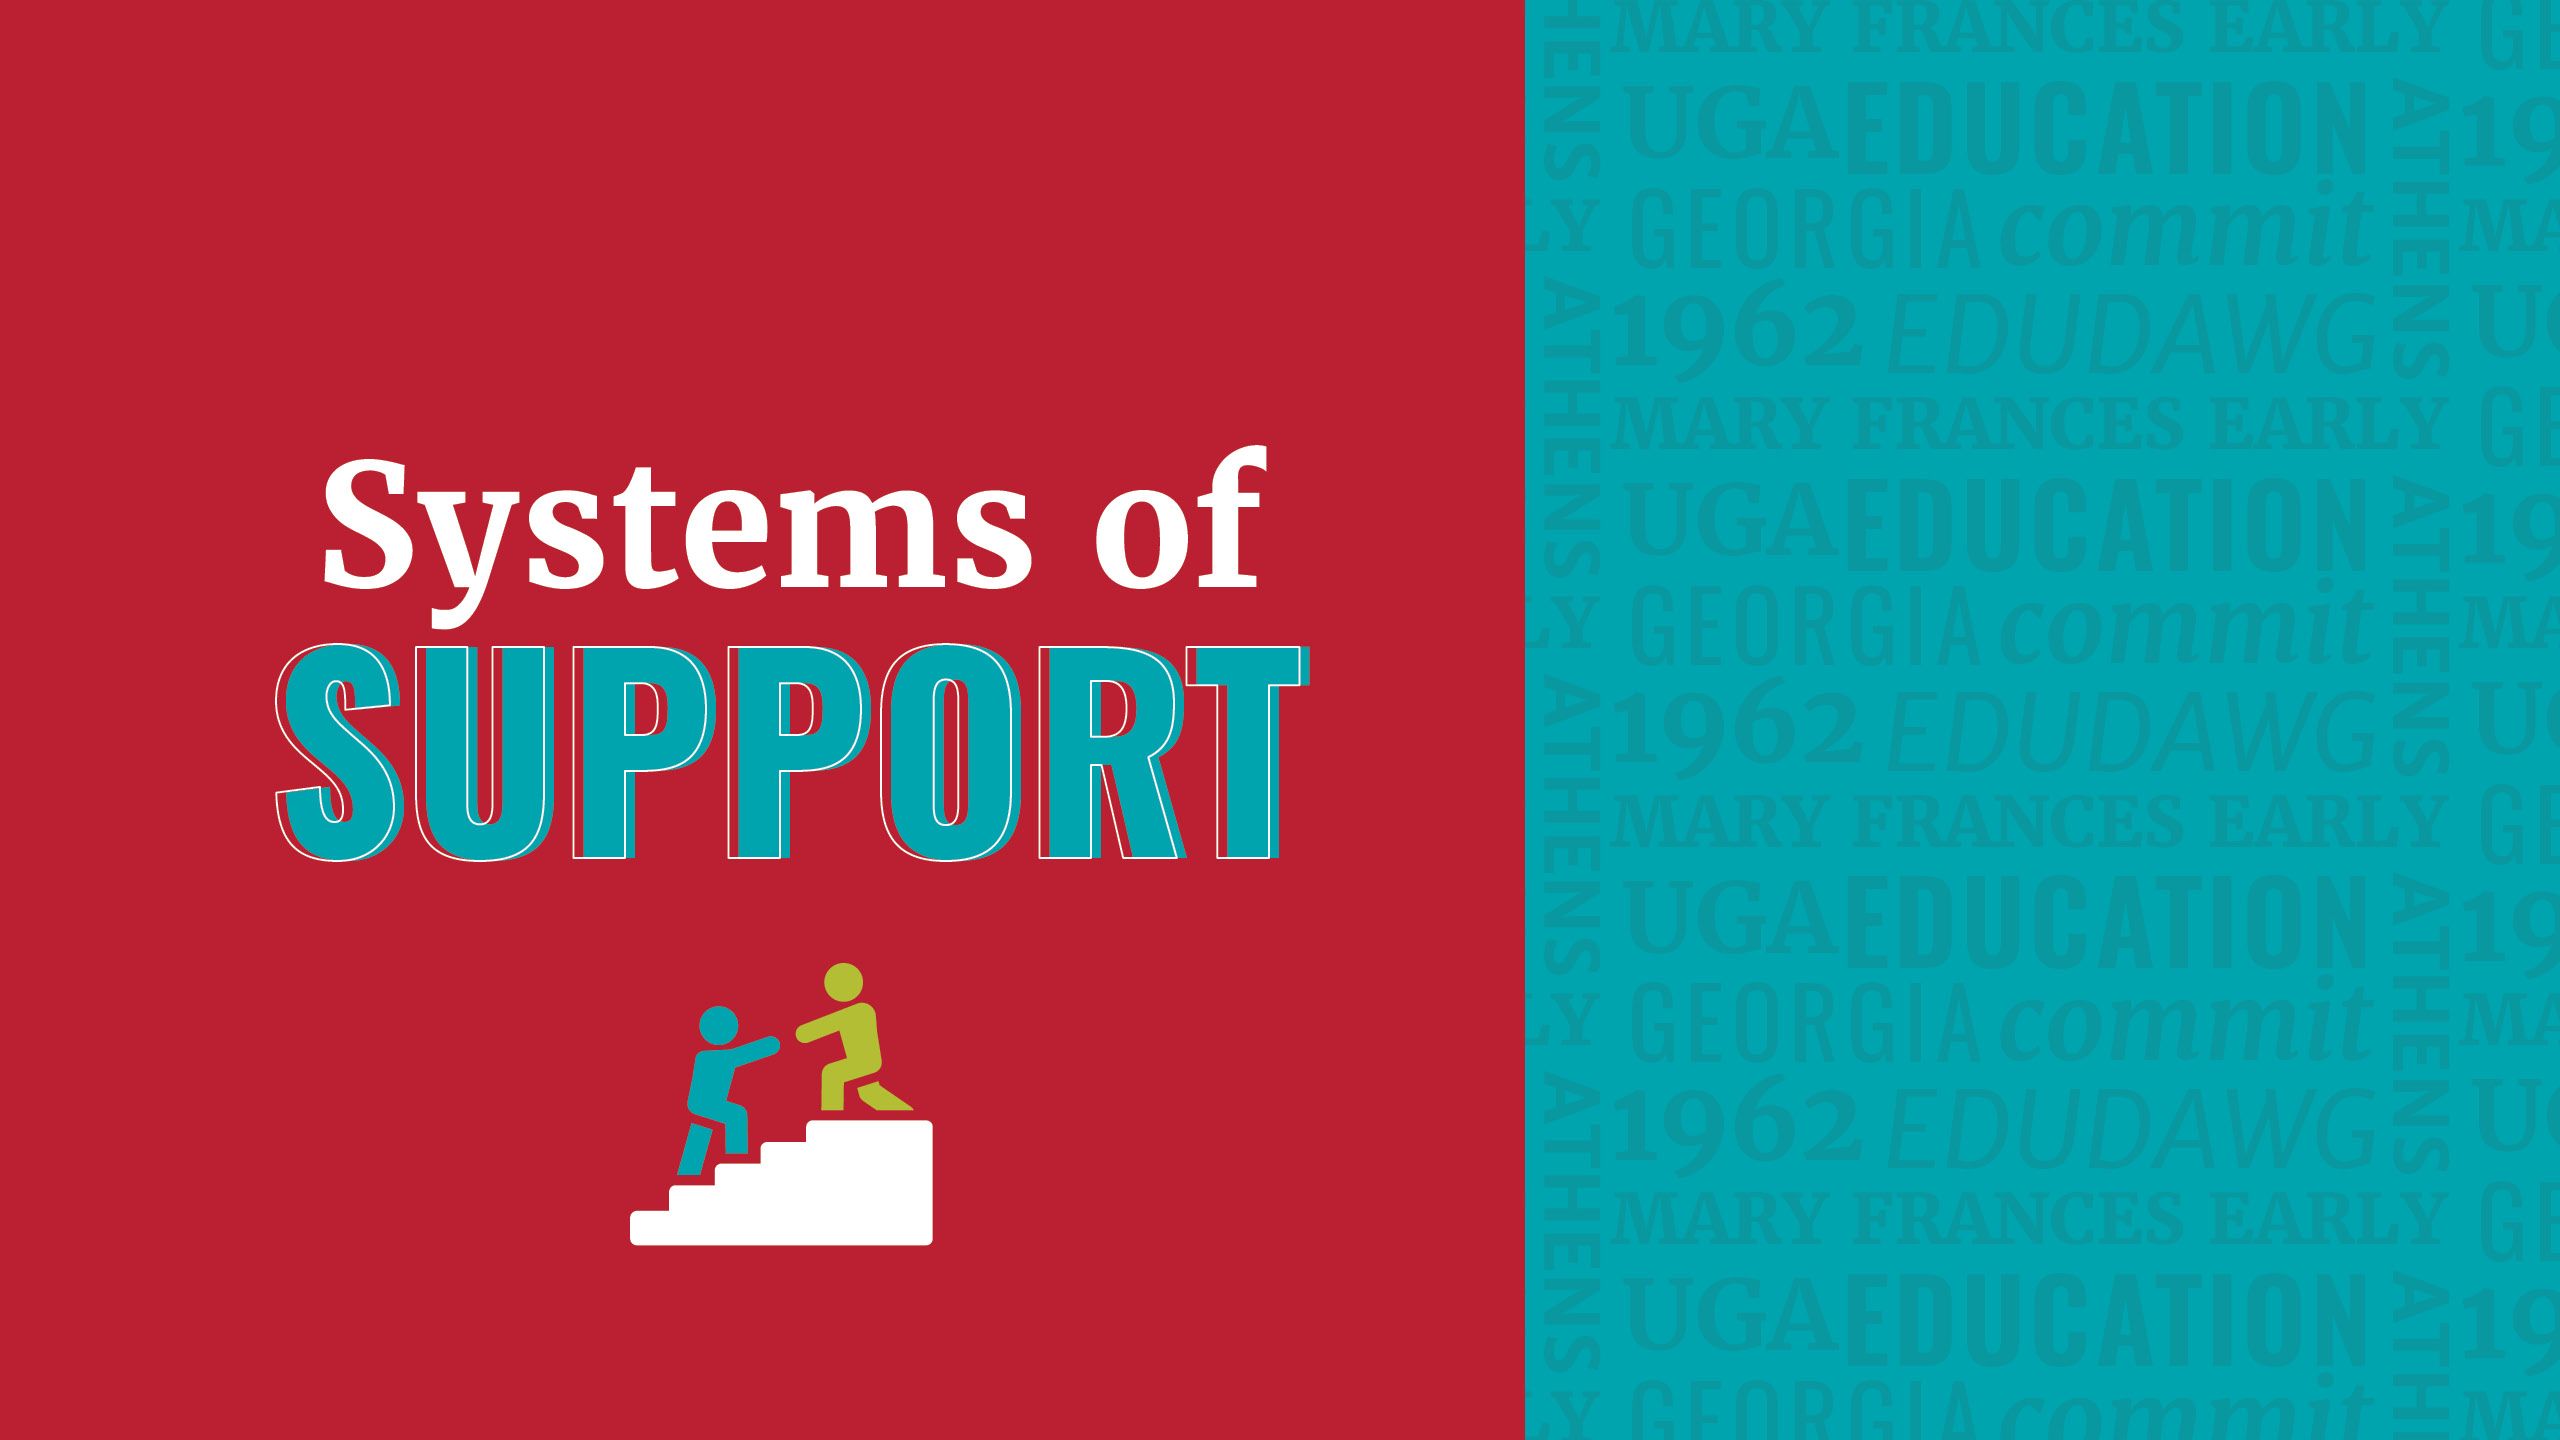 Systems of support